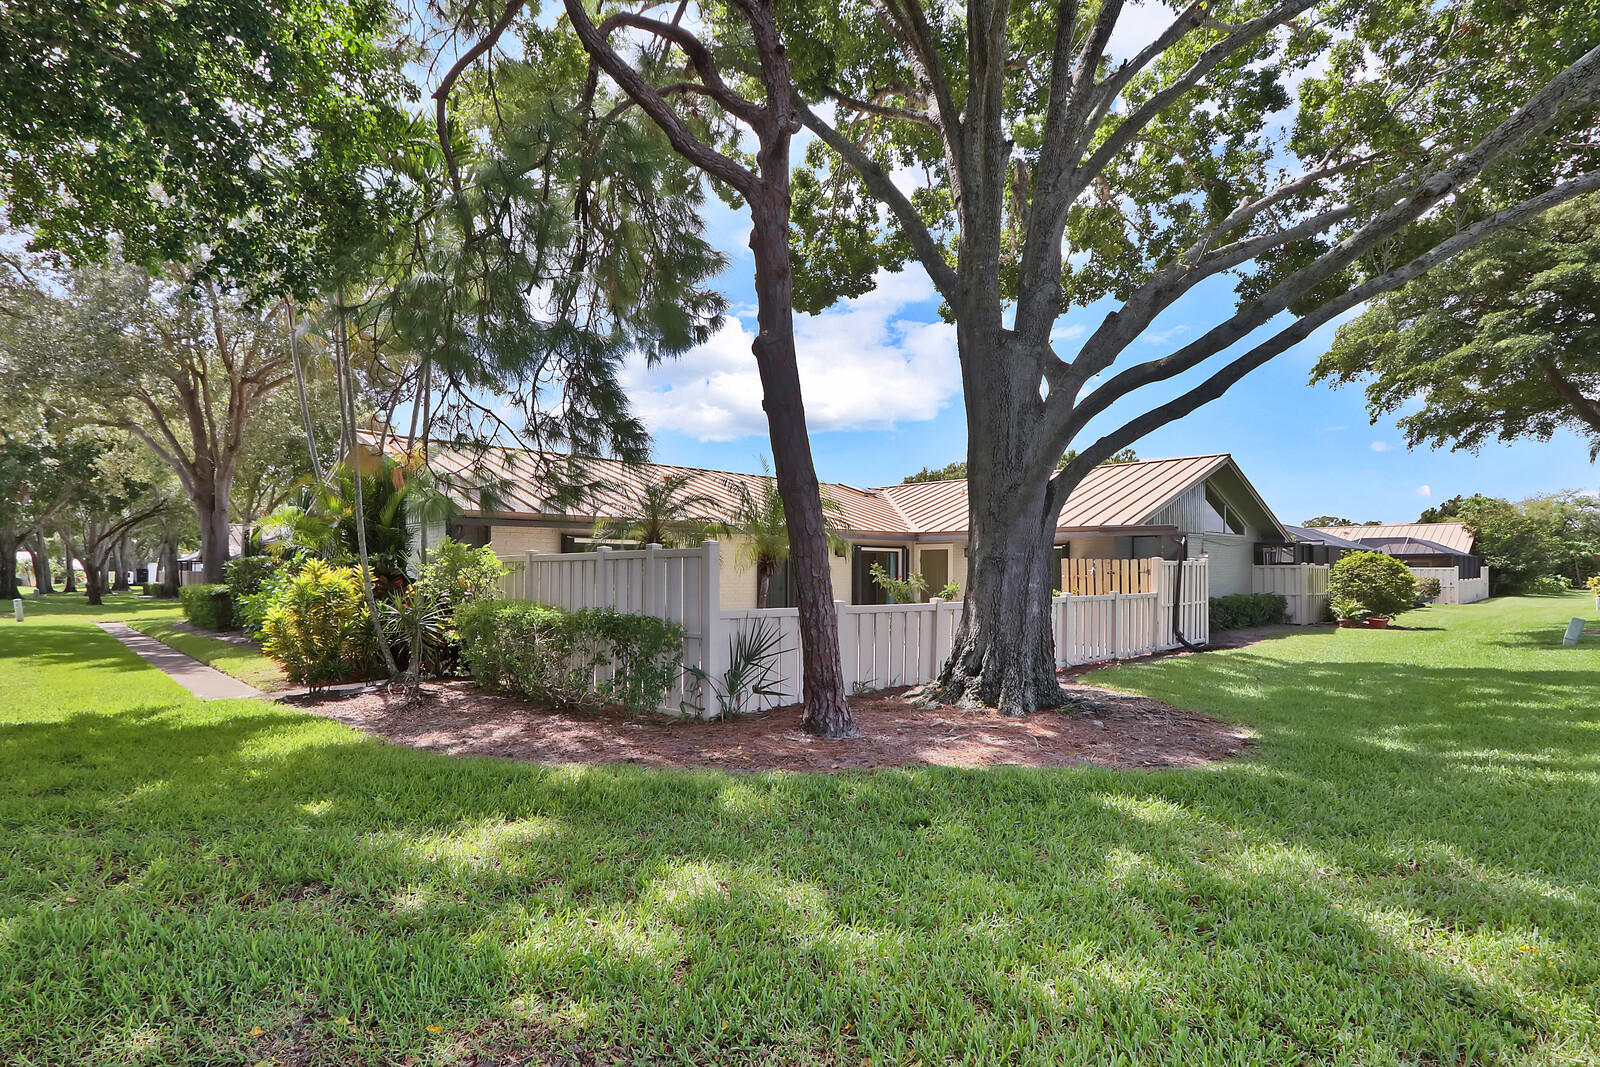 Palm Beach Gardens - BSR Realty Group